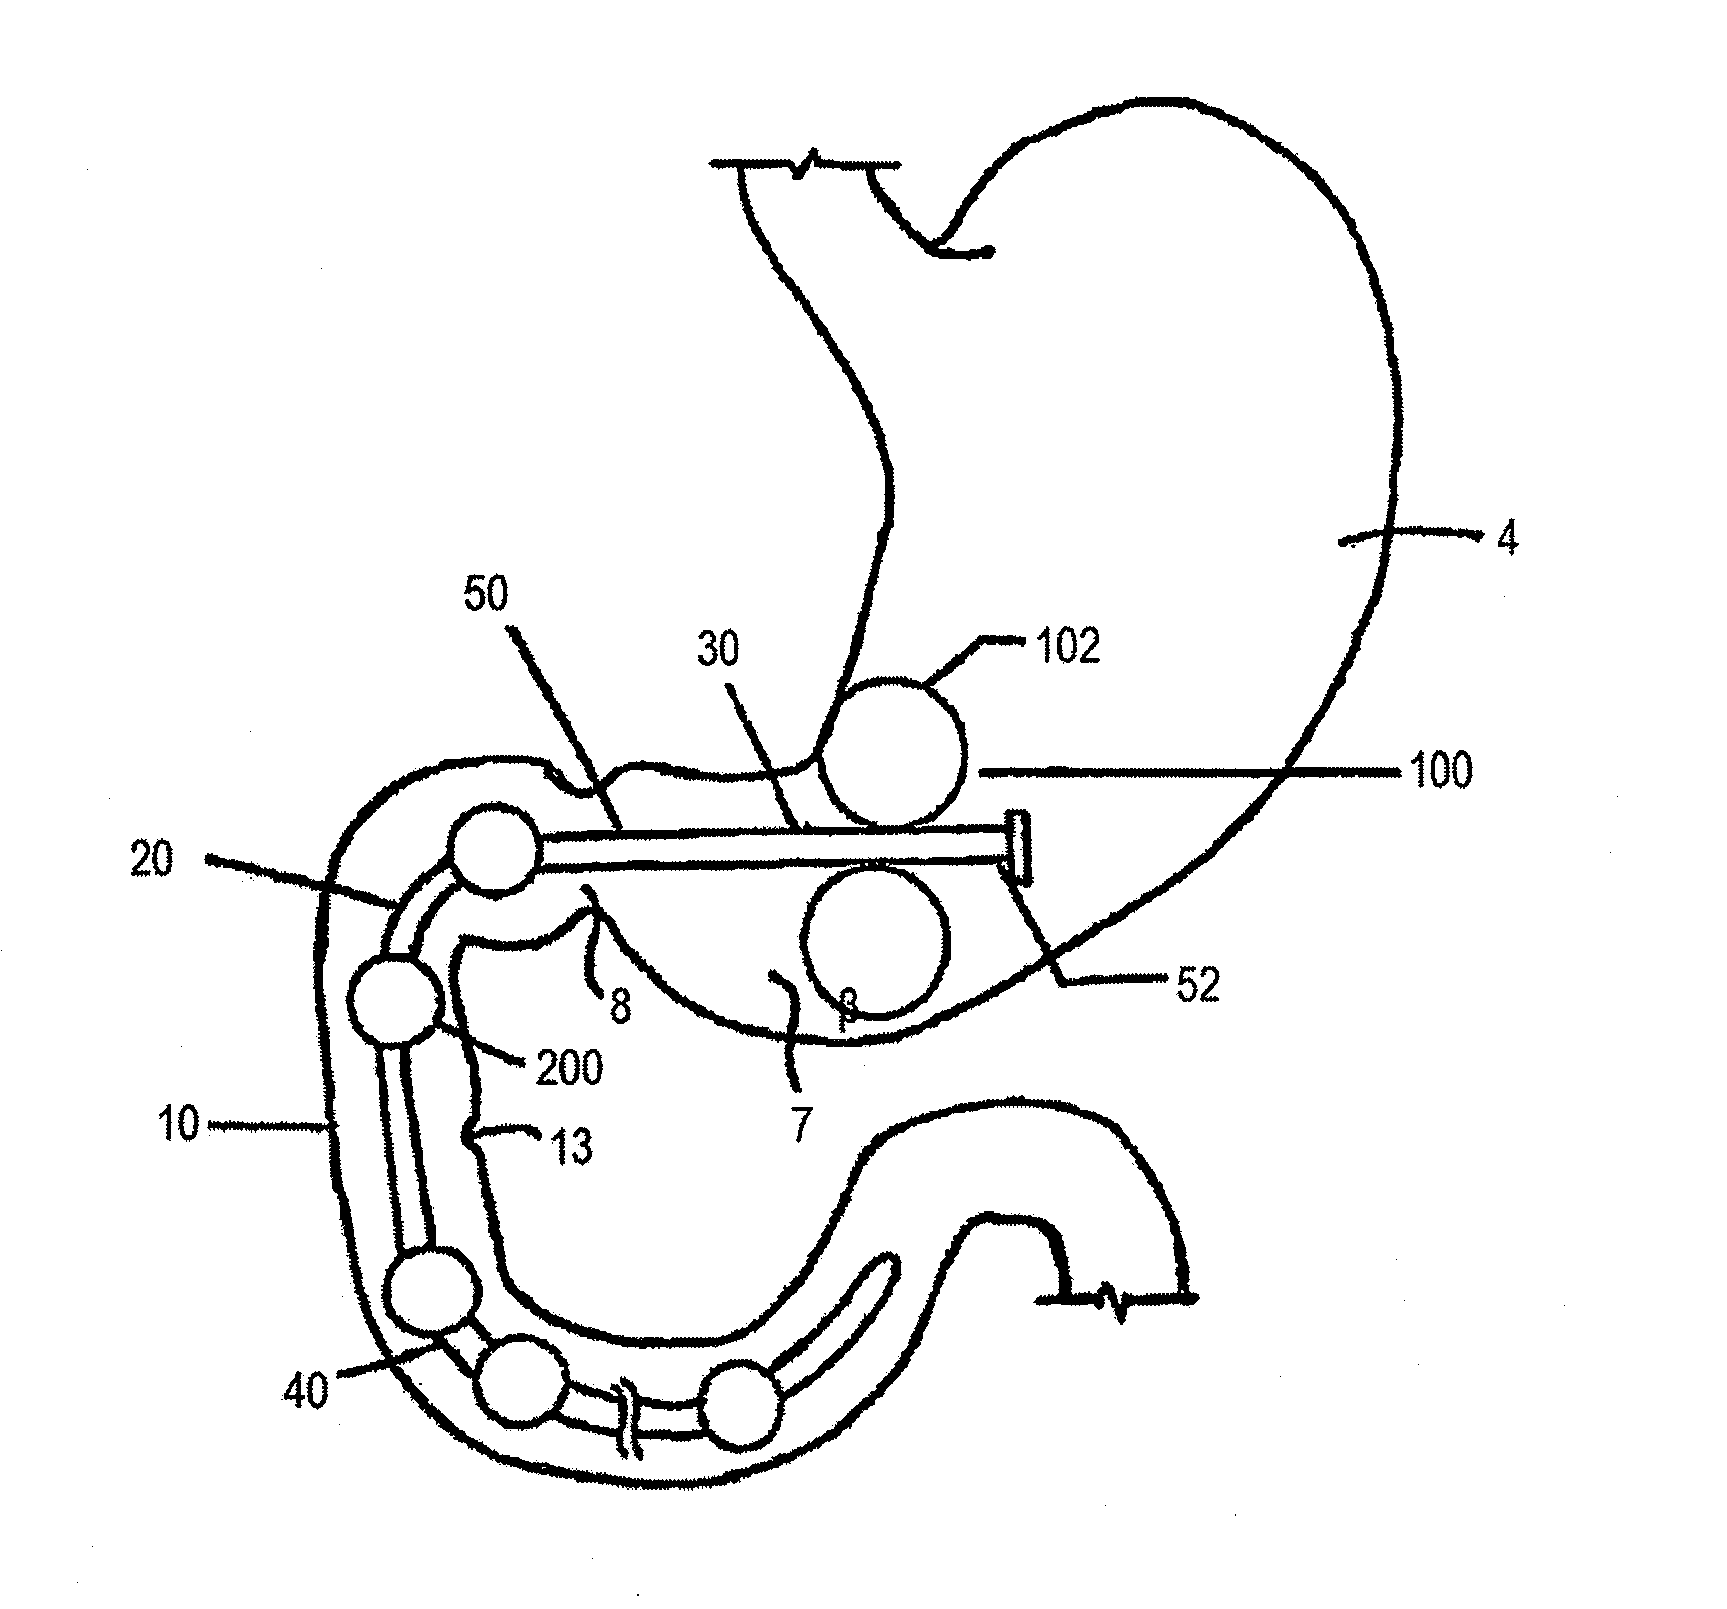 Duodenal gastrointestinal devices and related treatment methods